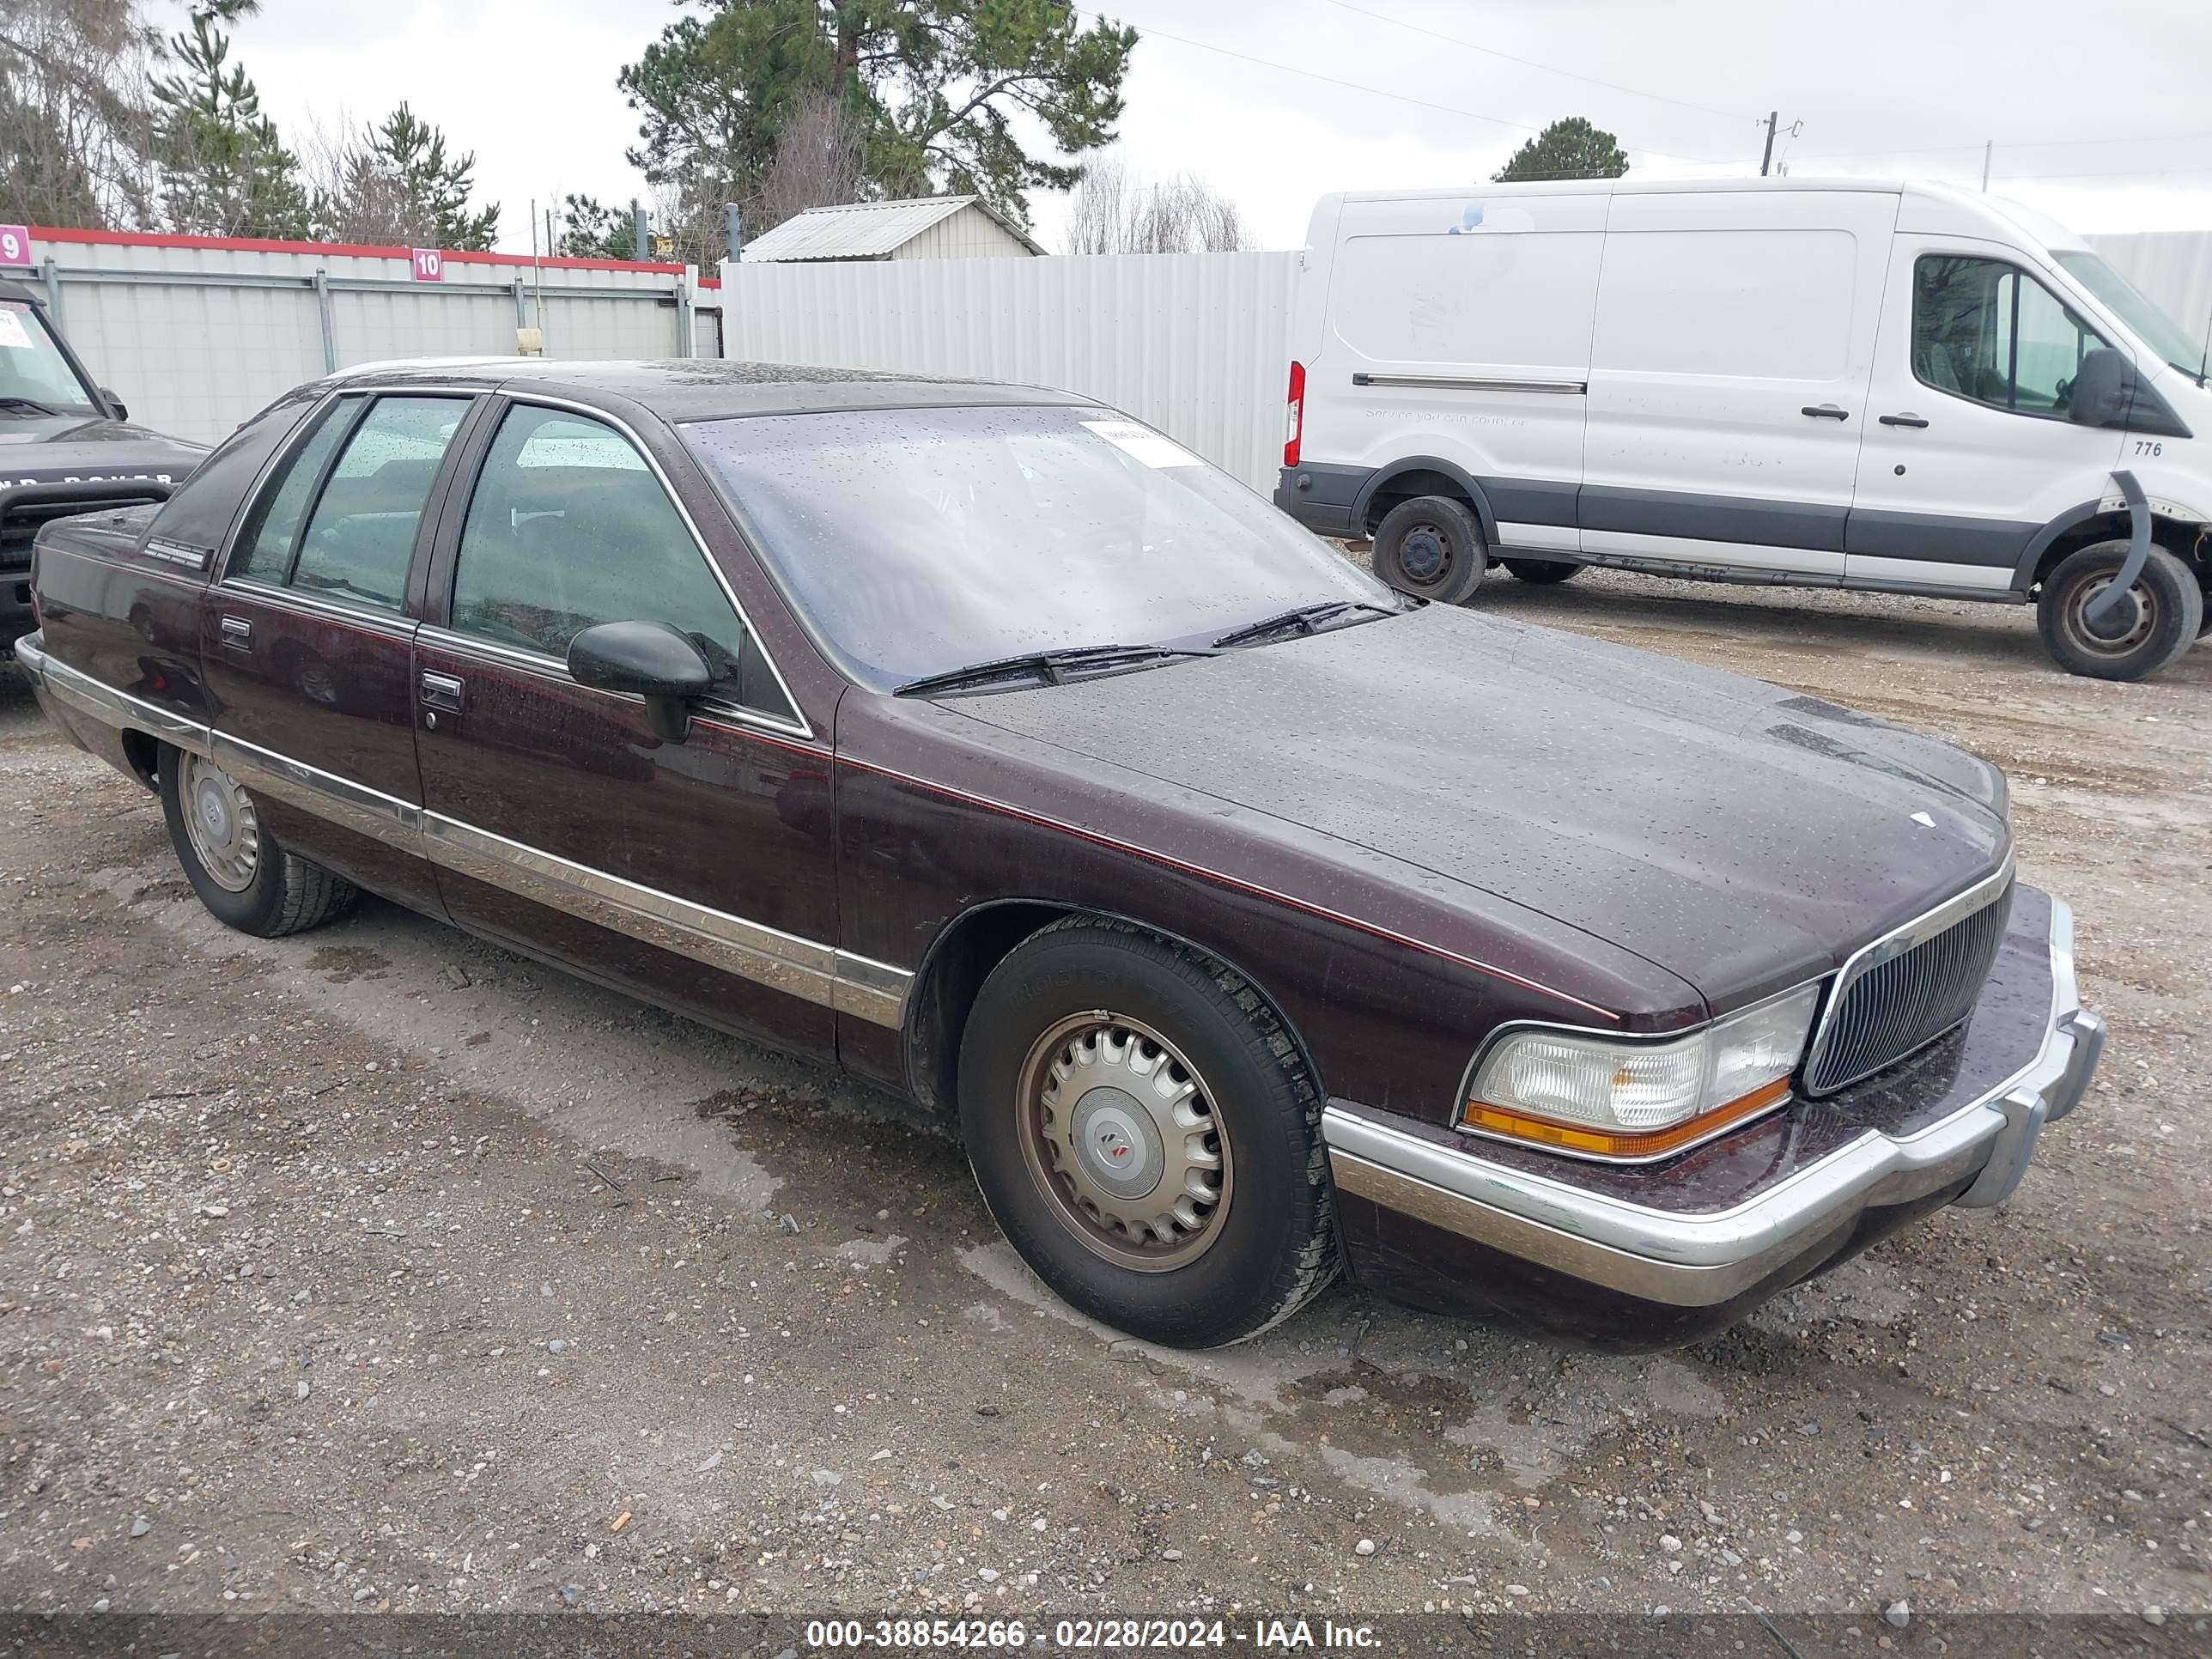 vin: 1G4BN52P2RR401622 1G4BN52P2RR401622 1994 buick roadmaster 5700 for Sale in 70507, 301 Malapart Rd, Lafayette, USA